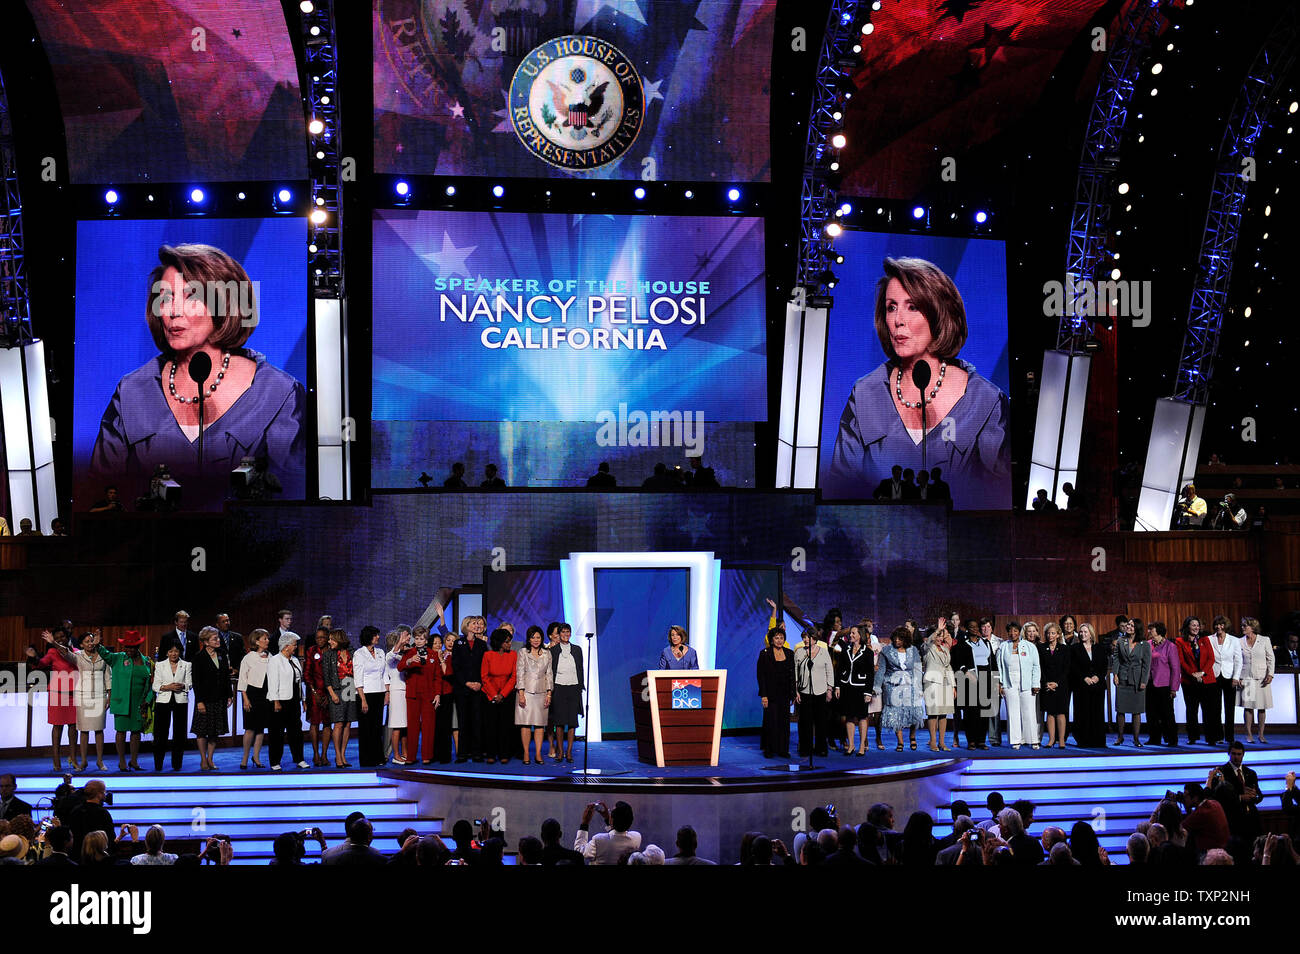 Speaker of the House Nancy Pelosi (D-NY) joined by the women of the House of Representatives speaks during the third day of the Democratic National Convention at the Pepsi Center in Denver on August 27, 2008. (UPI Photo/Kevin Dietsch) Stock Photo